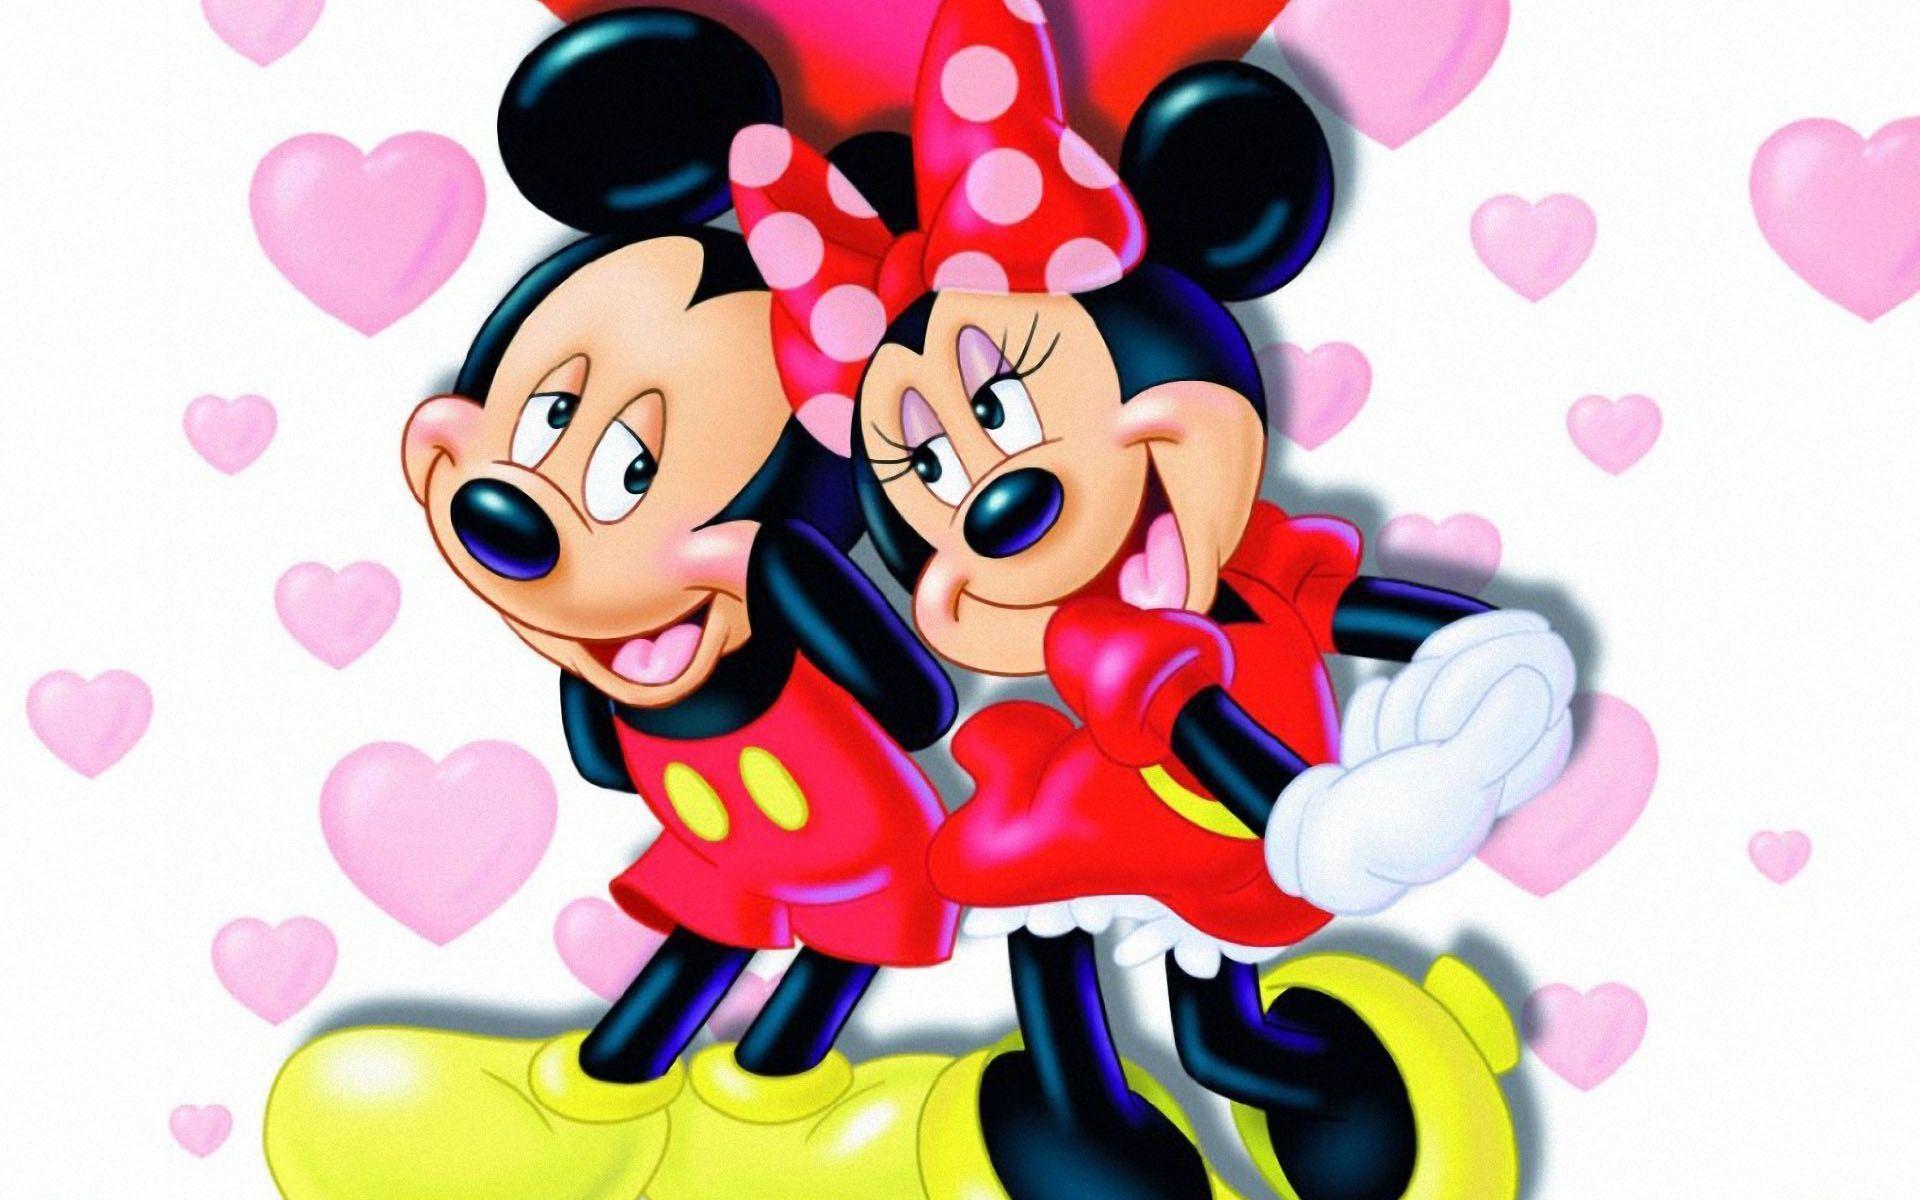 Mickey Mouse And Minnie Mouse In Love Wallpaper. Foolhardi